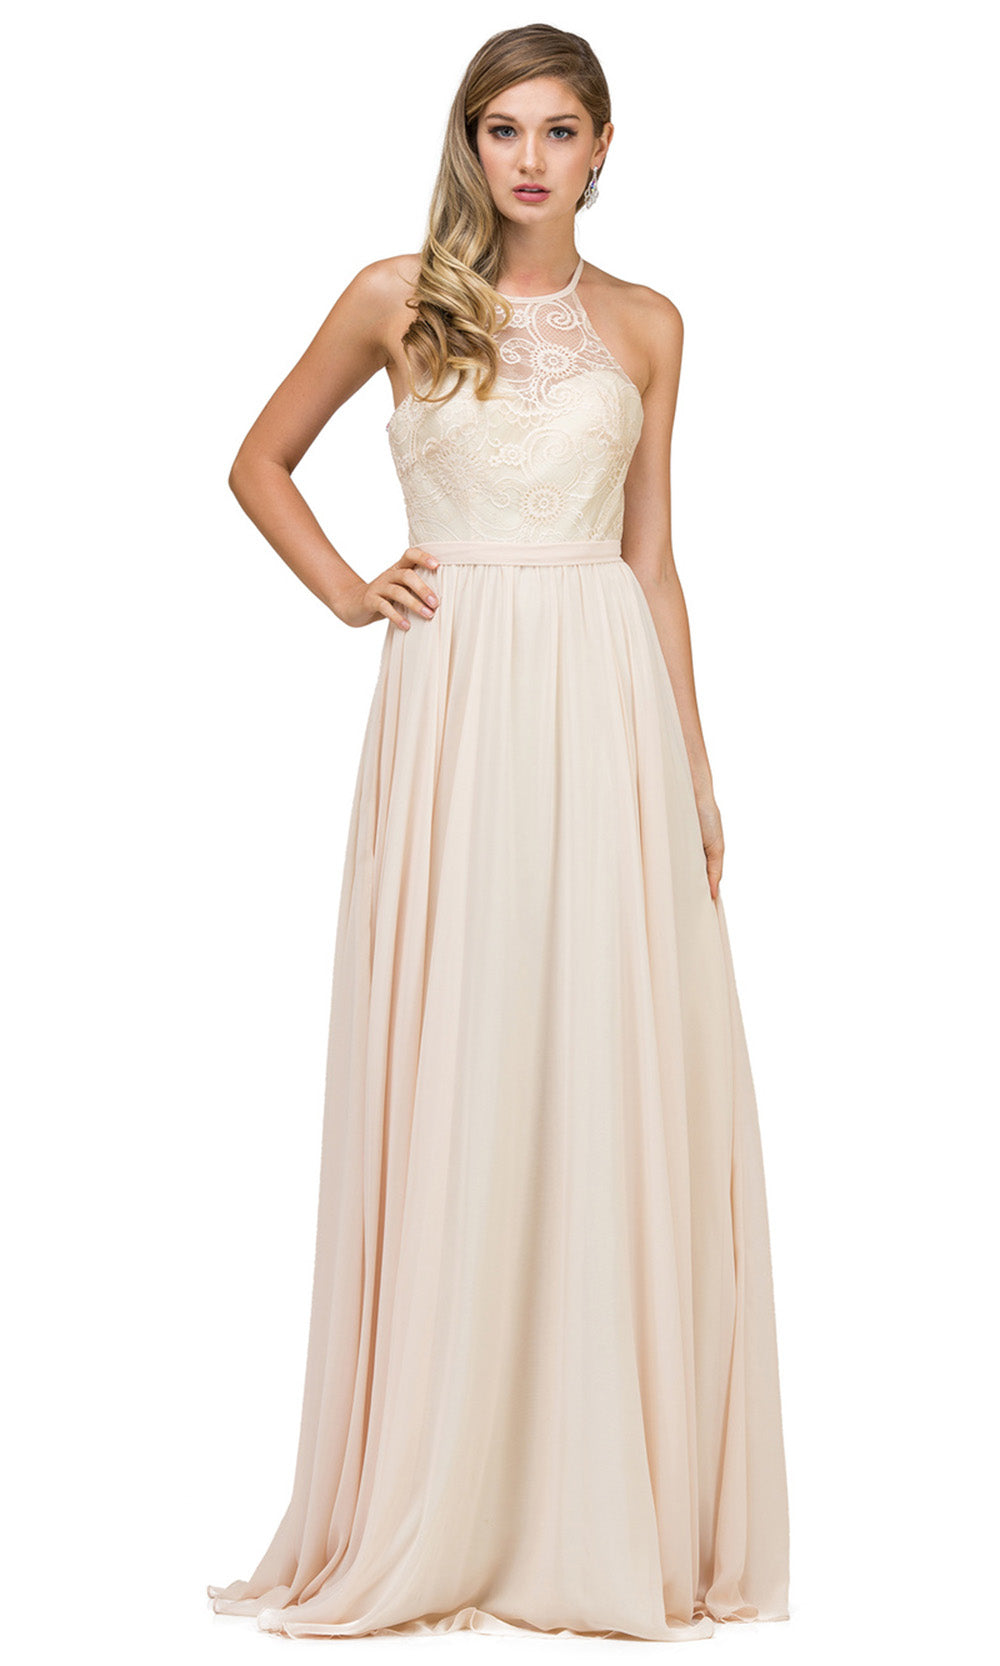 Dancing Queen - 2009 Halter Neck Crisscross Strap Back A-Line Gown In Champagne & Gold